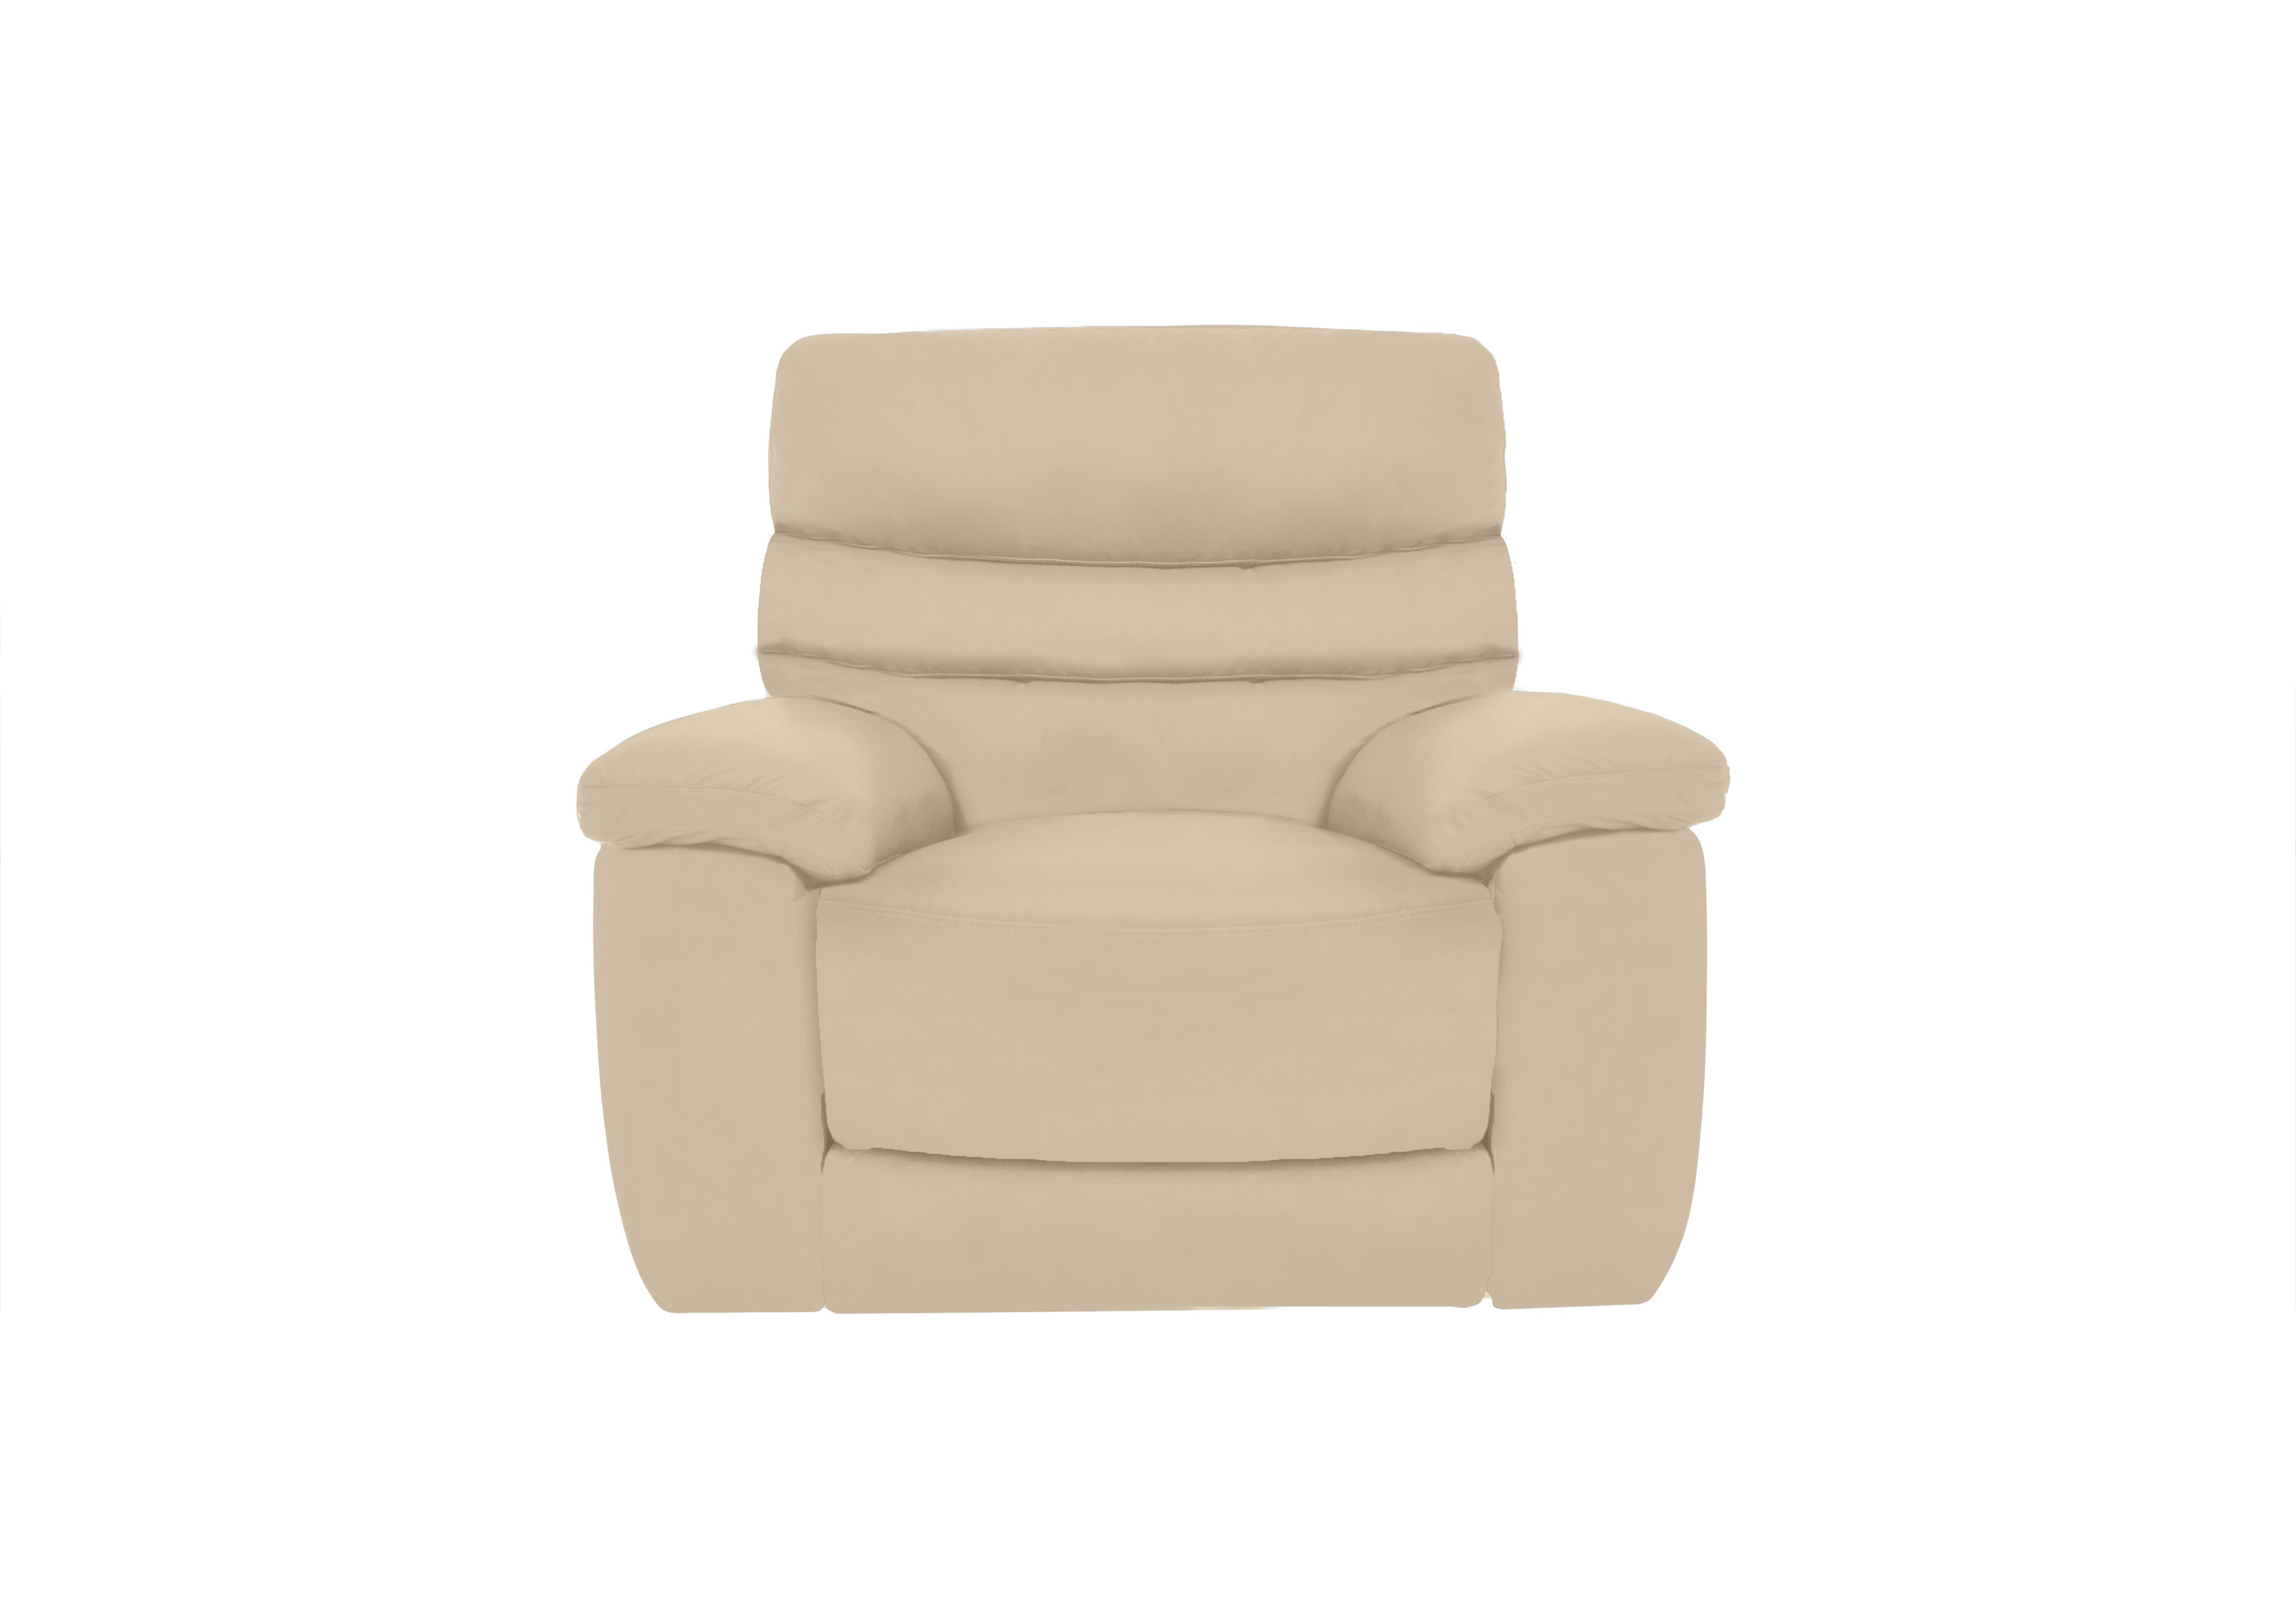 Nimbus Leather Power Recliner Chair with Power Headrest in Bx-862c Bisque on Furniture Village